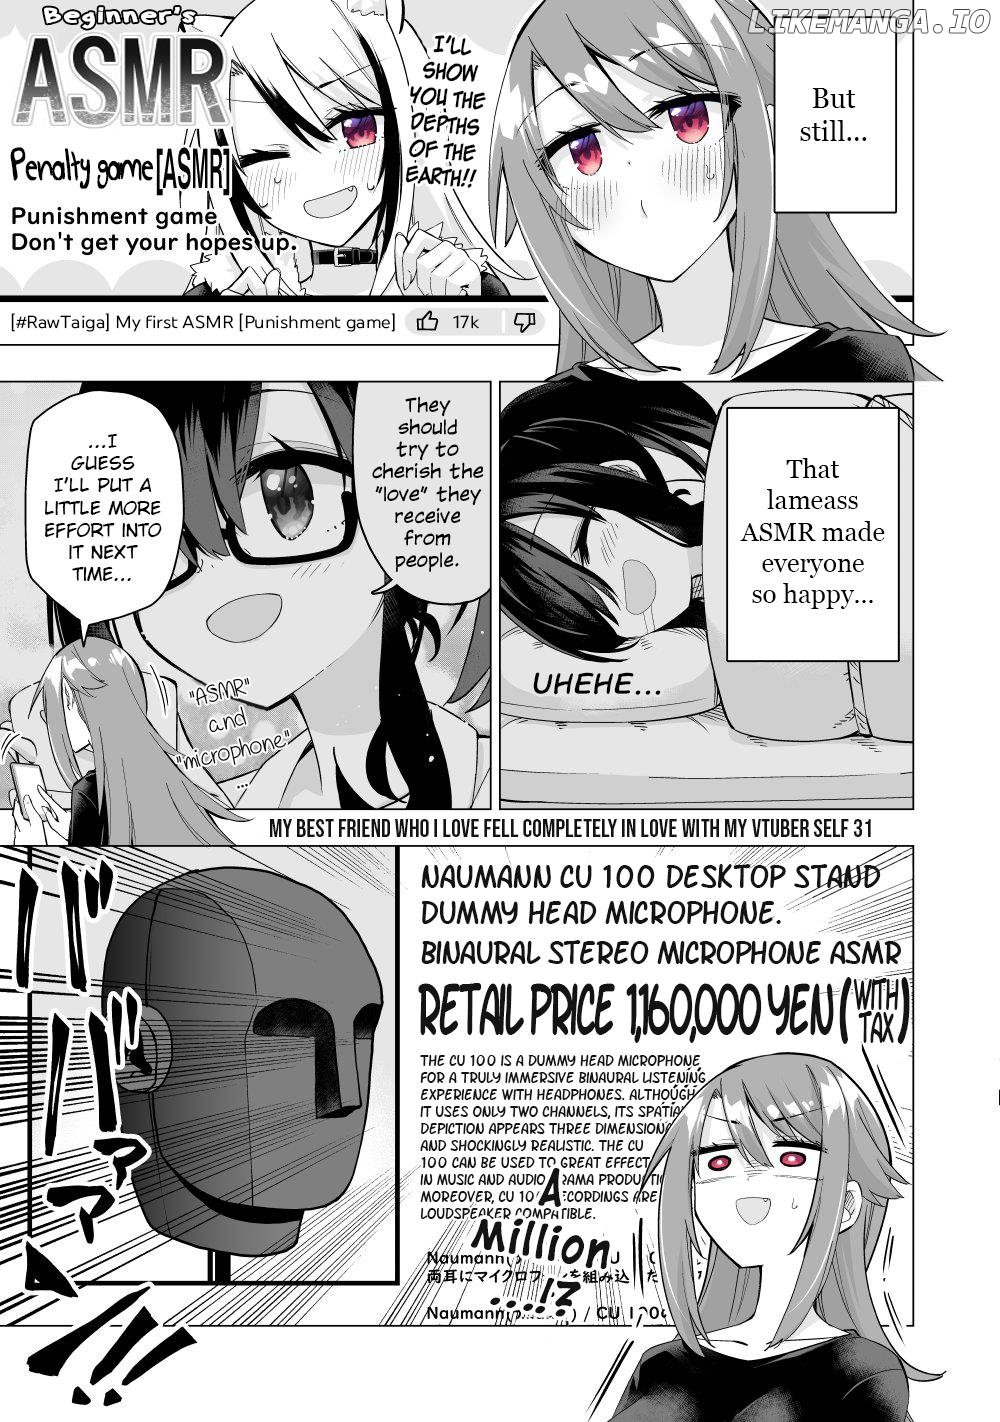 My Best Friend Who I Love Fell Completely In Love With My Vtuber Self chapter 31 - page 1